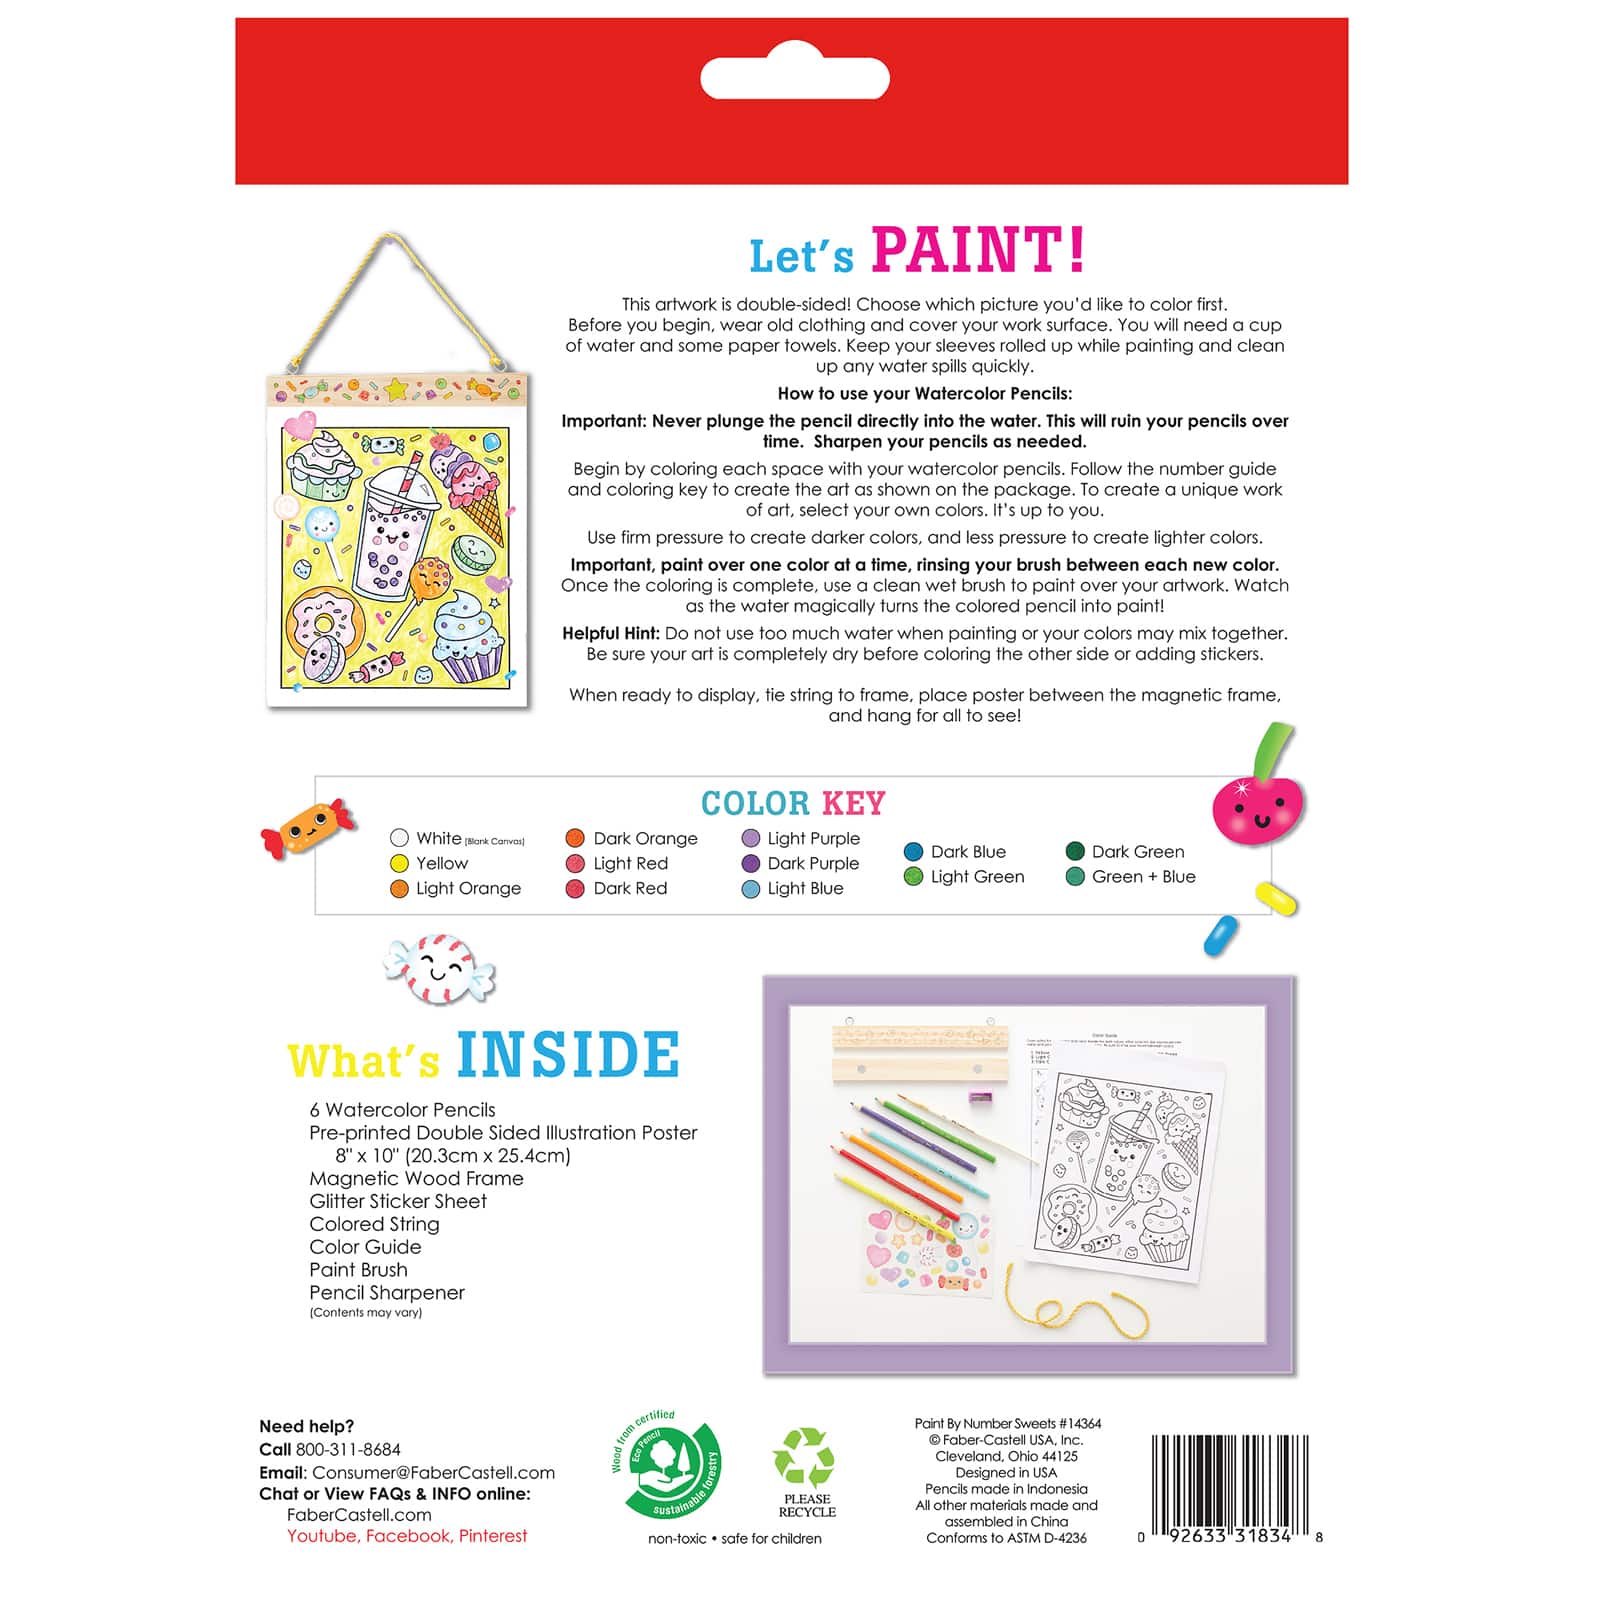 Faber-Castell&#xAE; Sweets Paint by Number Wall Art Kit